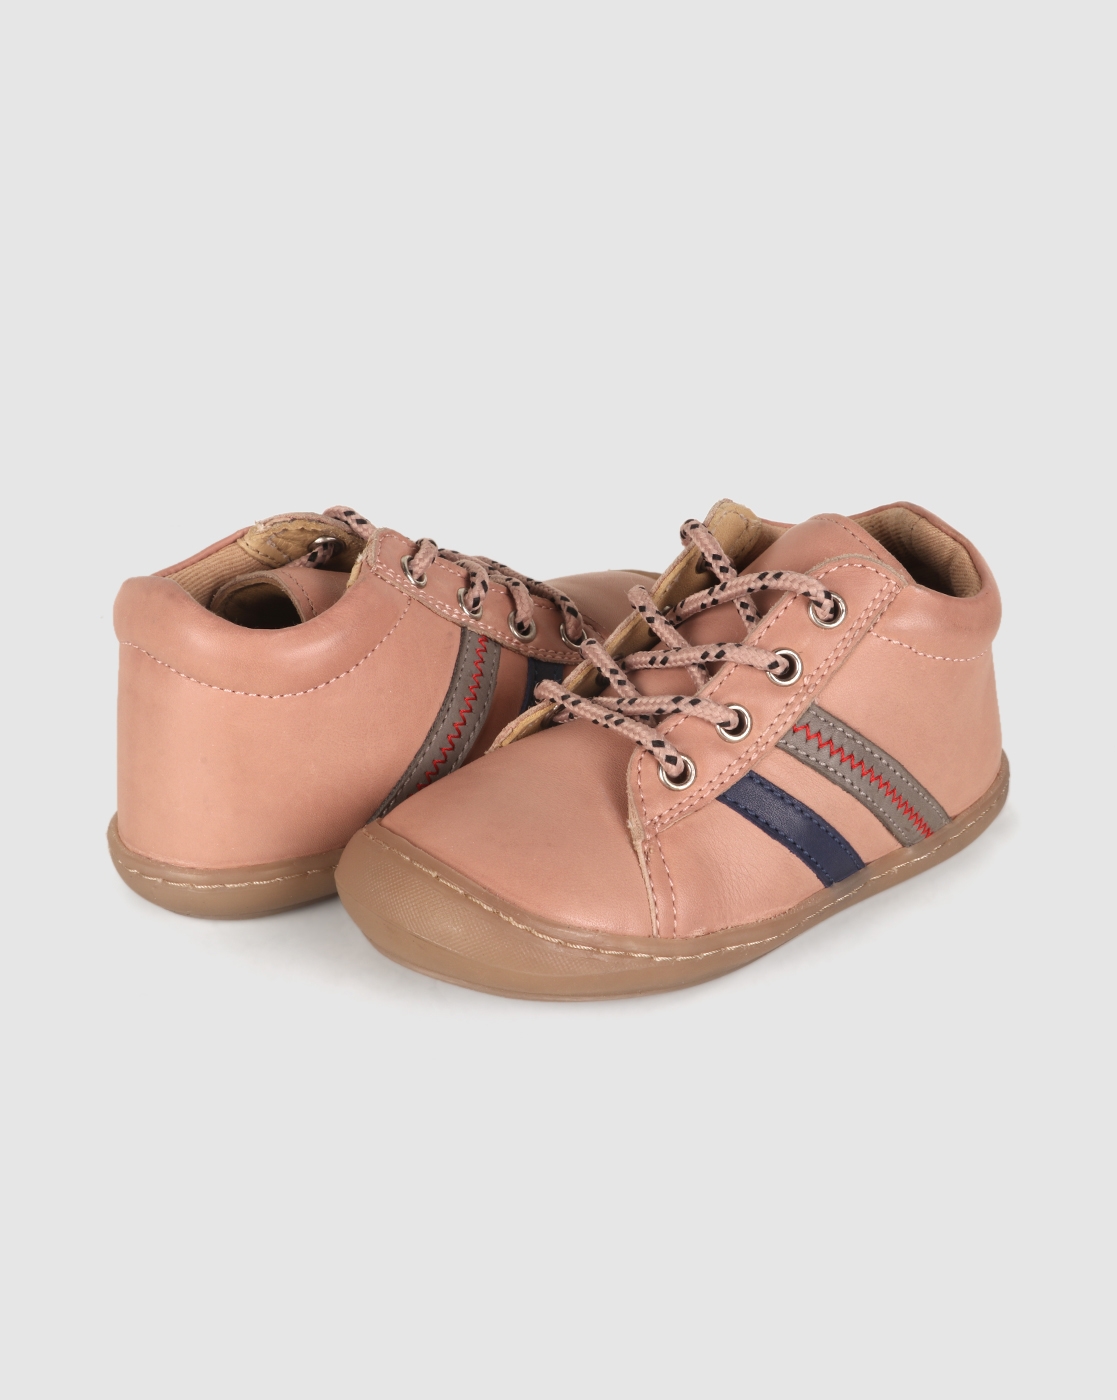 Mothercare | Boys First Walker Shoes - Pink